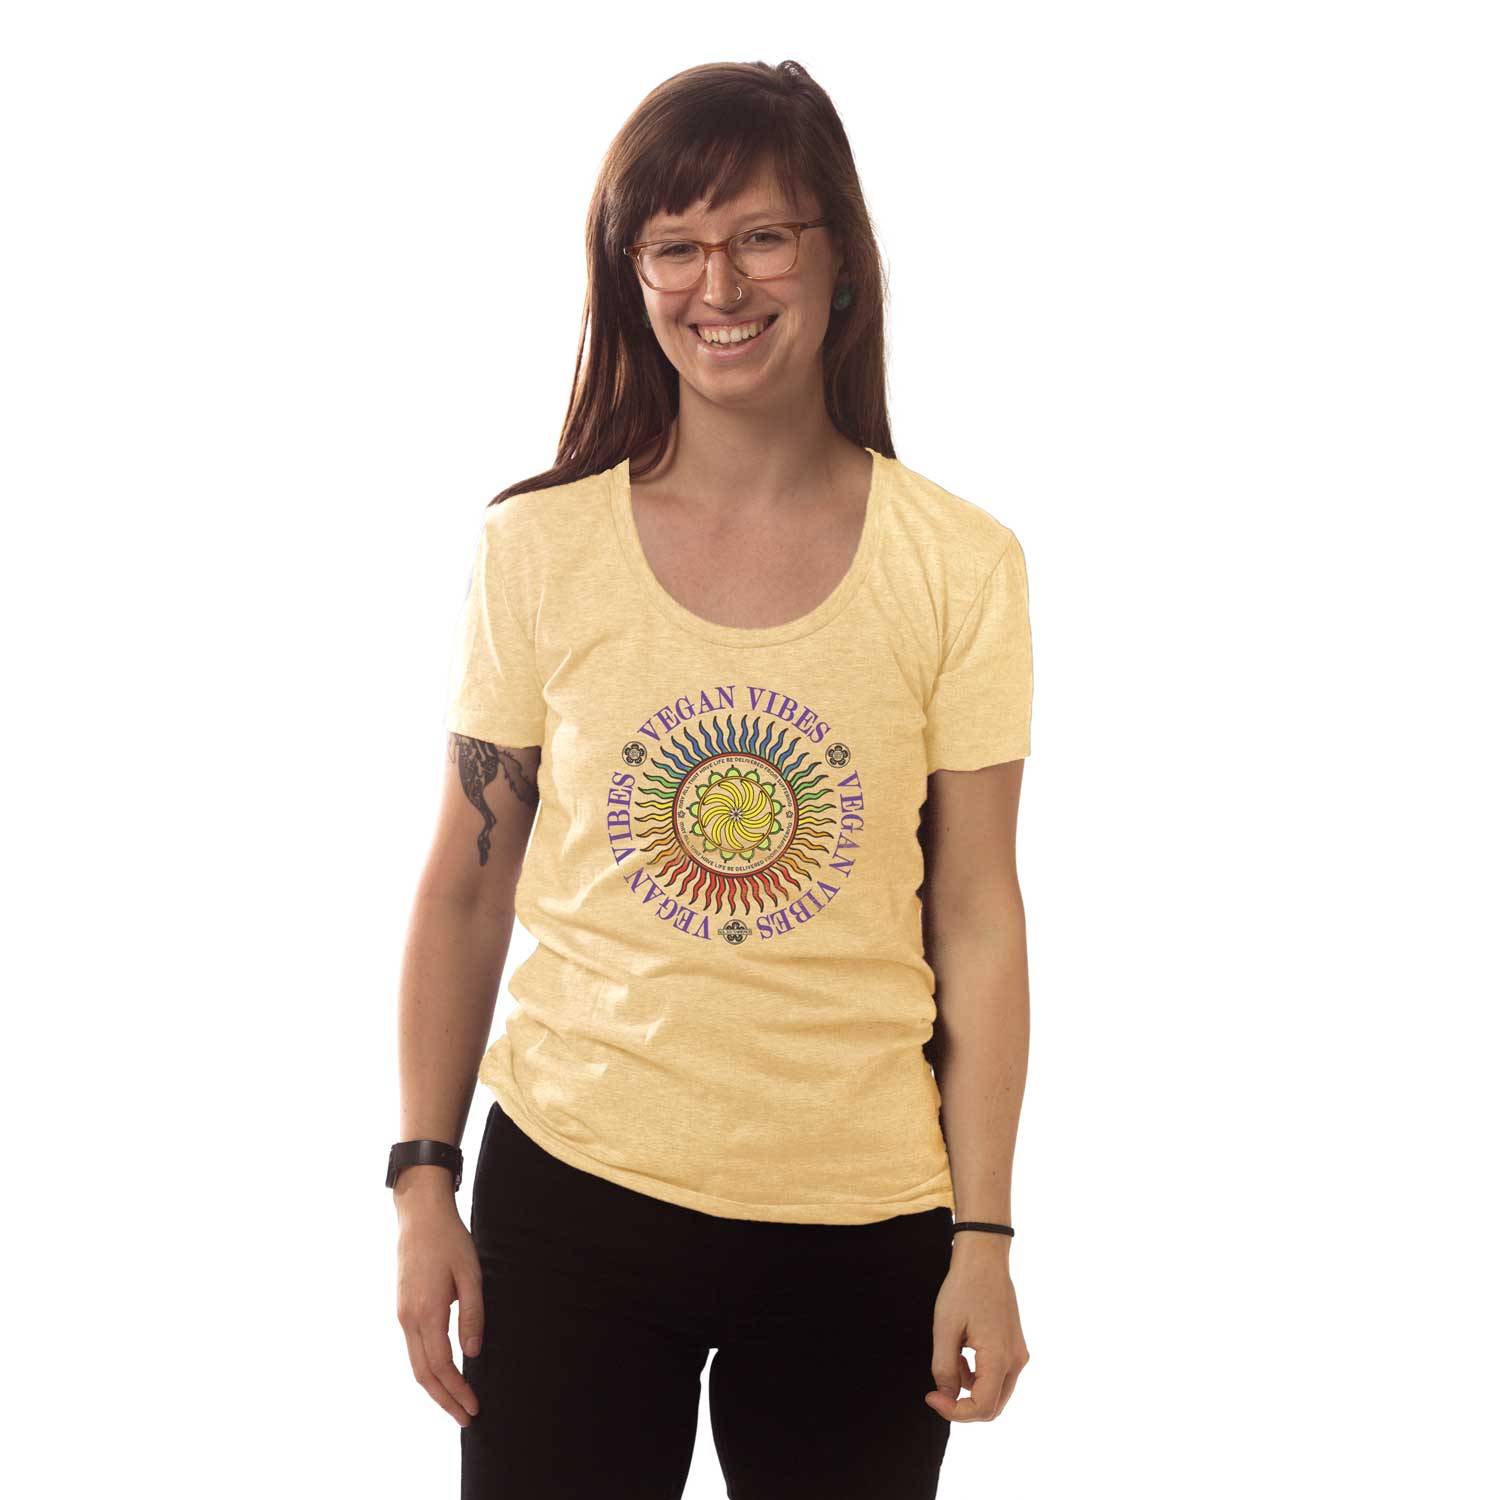 Women's Vegan Vibes Cool Hippie Graphic T-Shirt | Vintage Vegetarian Tee on Model | Solid Threads